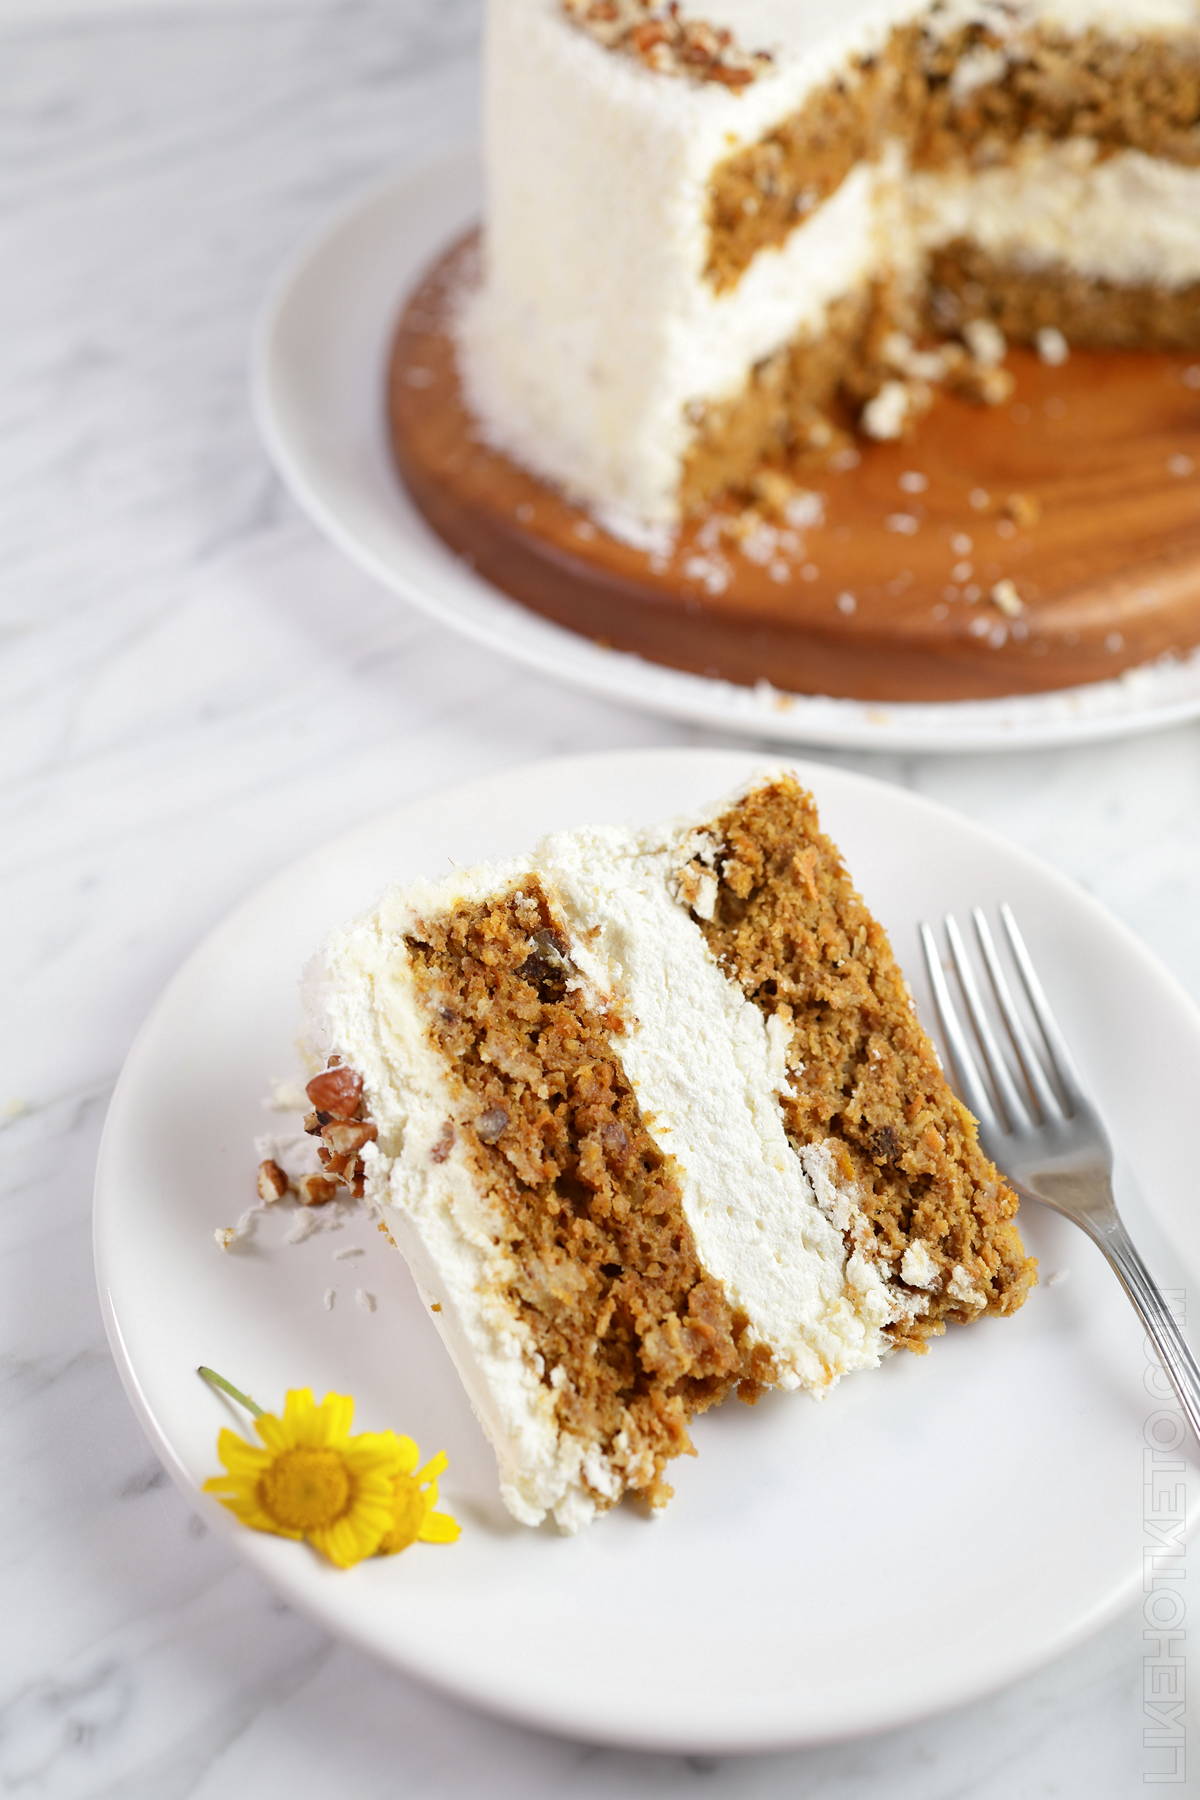 Slice of lupin flour carrot cake on a white plate, fork and flowers.